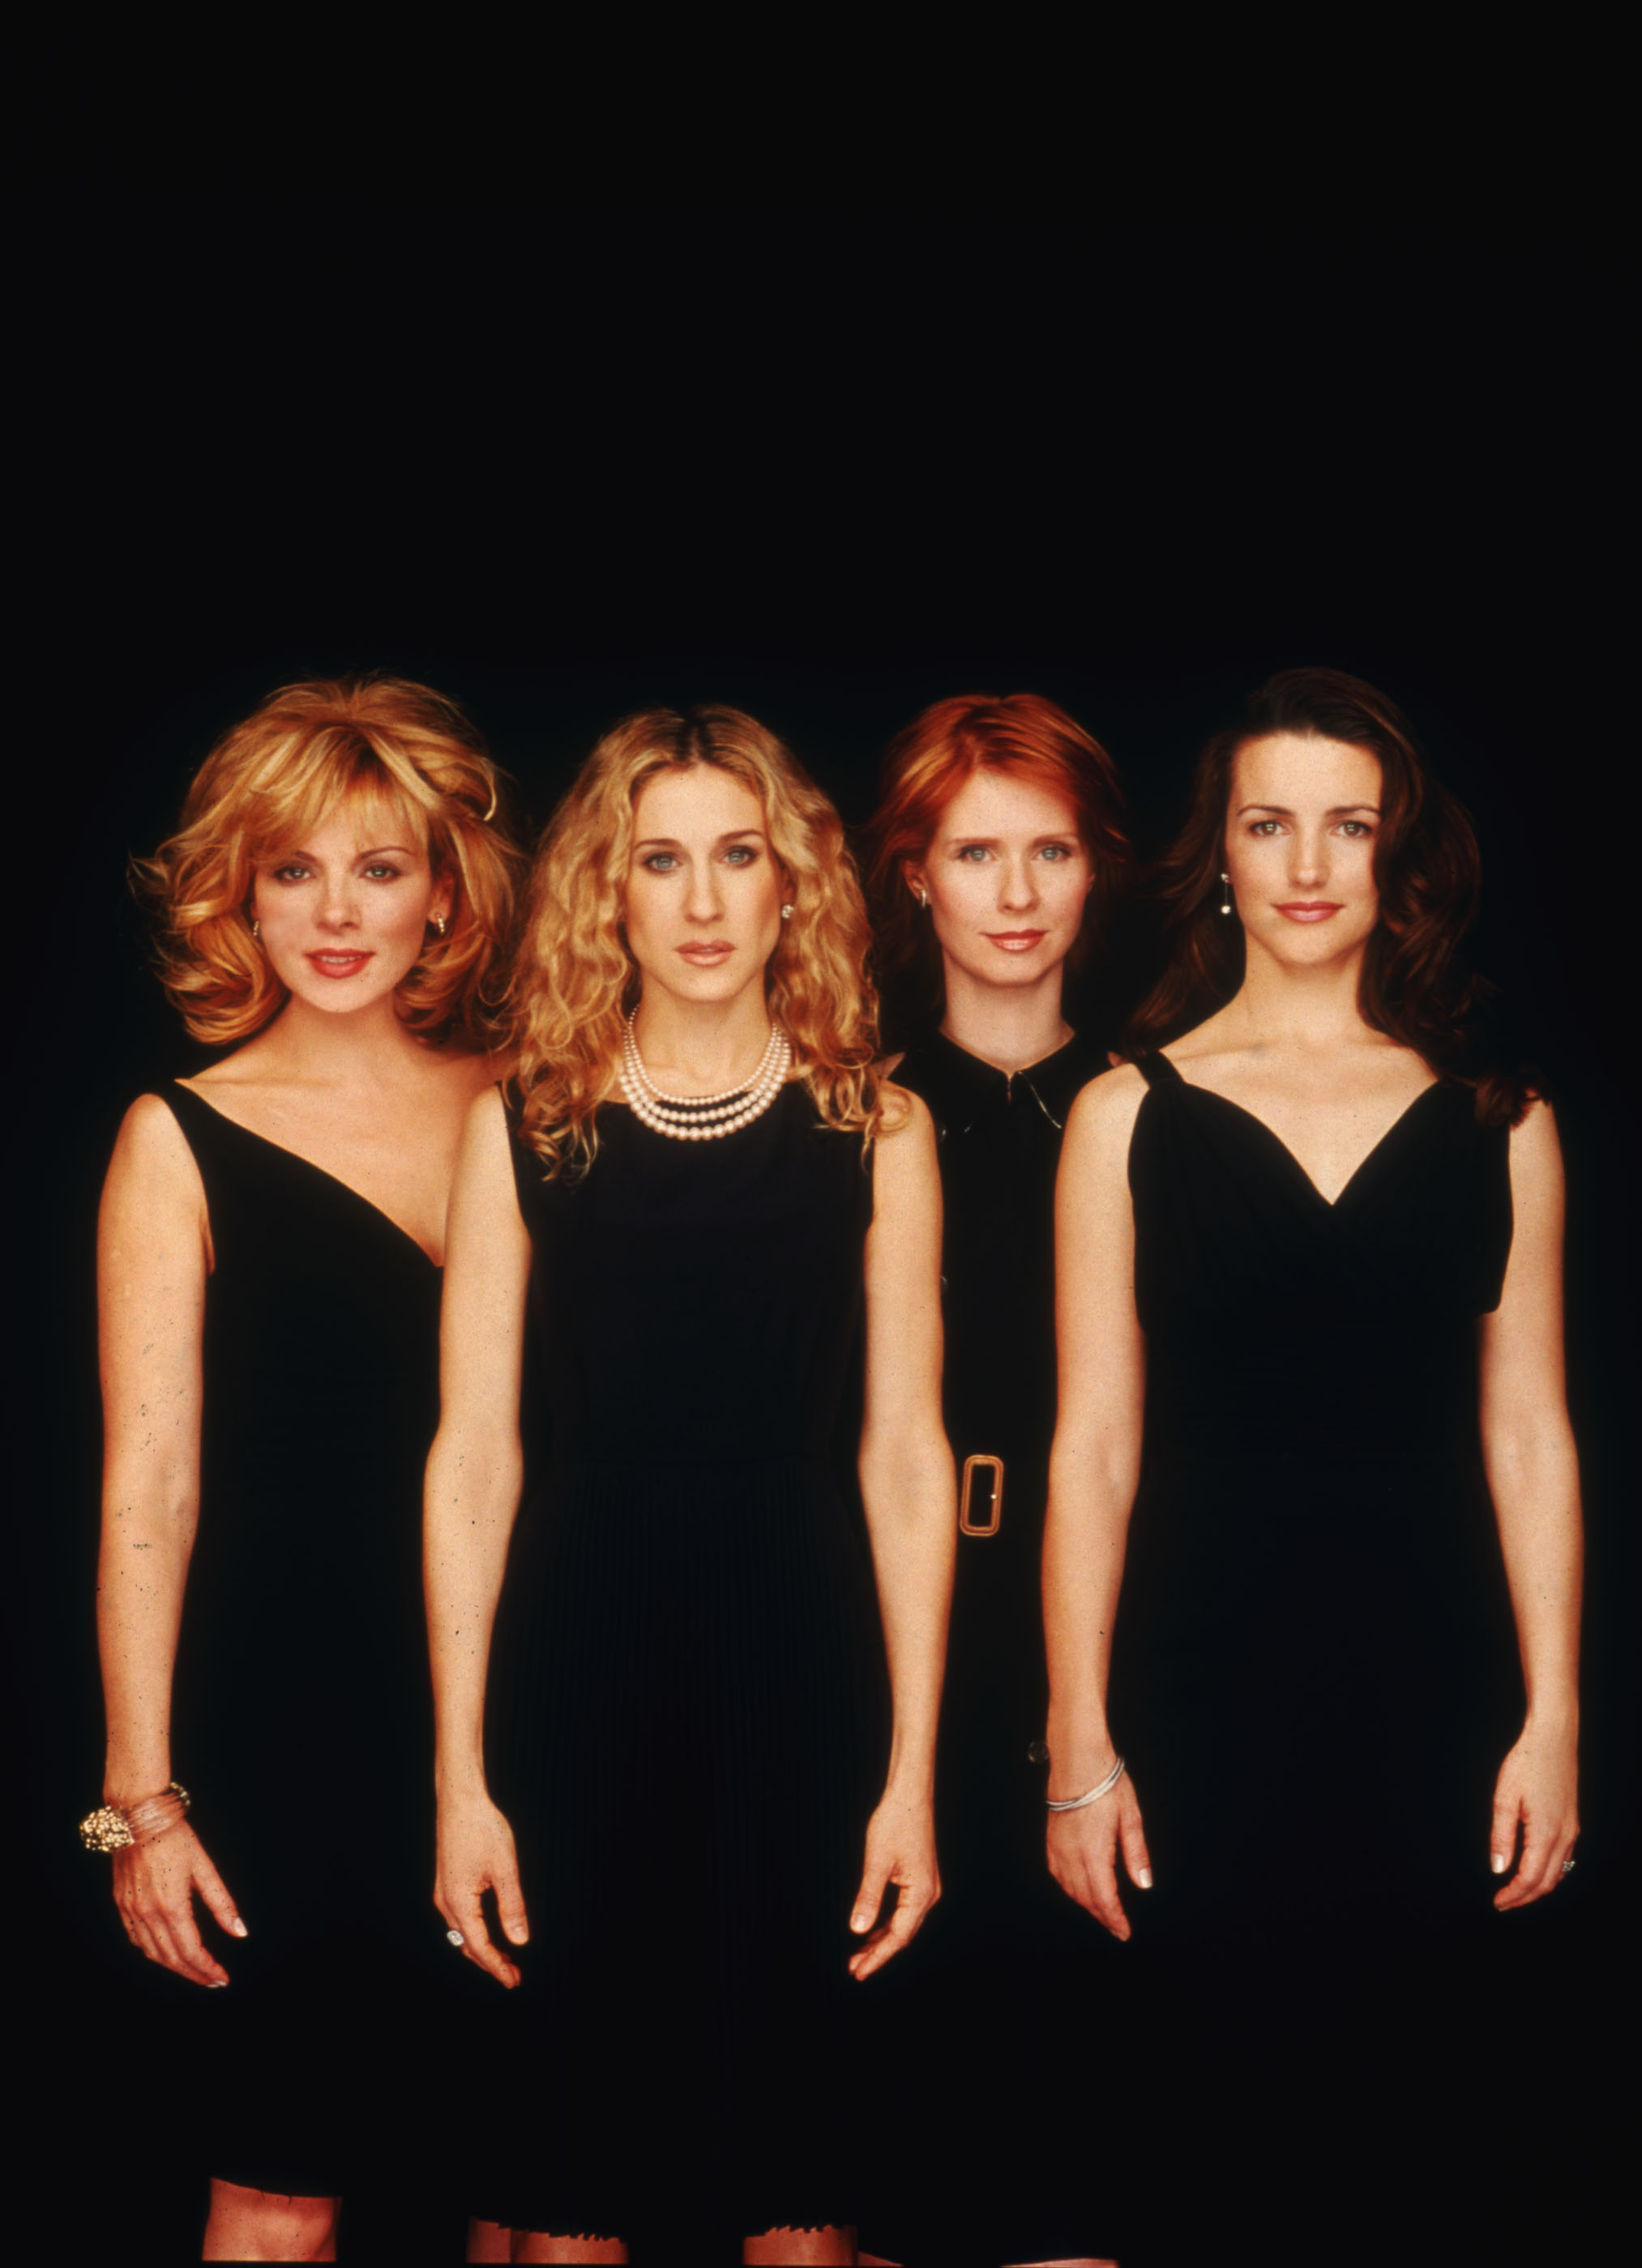 (L-R) Kim Cattrall, Sarah Jessica Parker, Cynthia Nixon, and Kristin Davis pose for a portrait in an undated photo on the set of the HBO series "Sex and the City." | Source: Getty Images